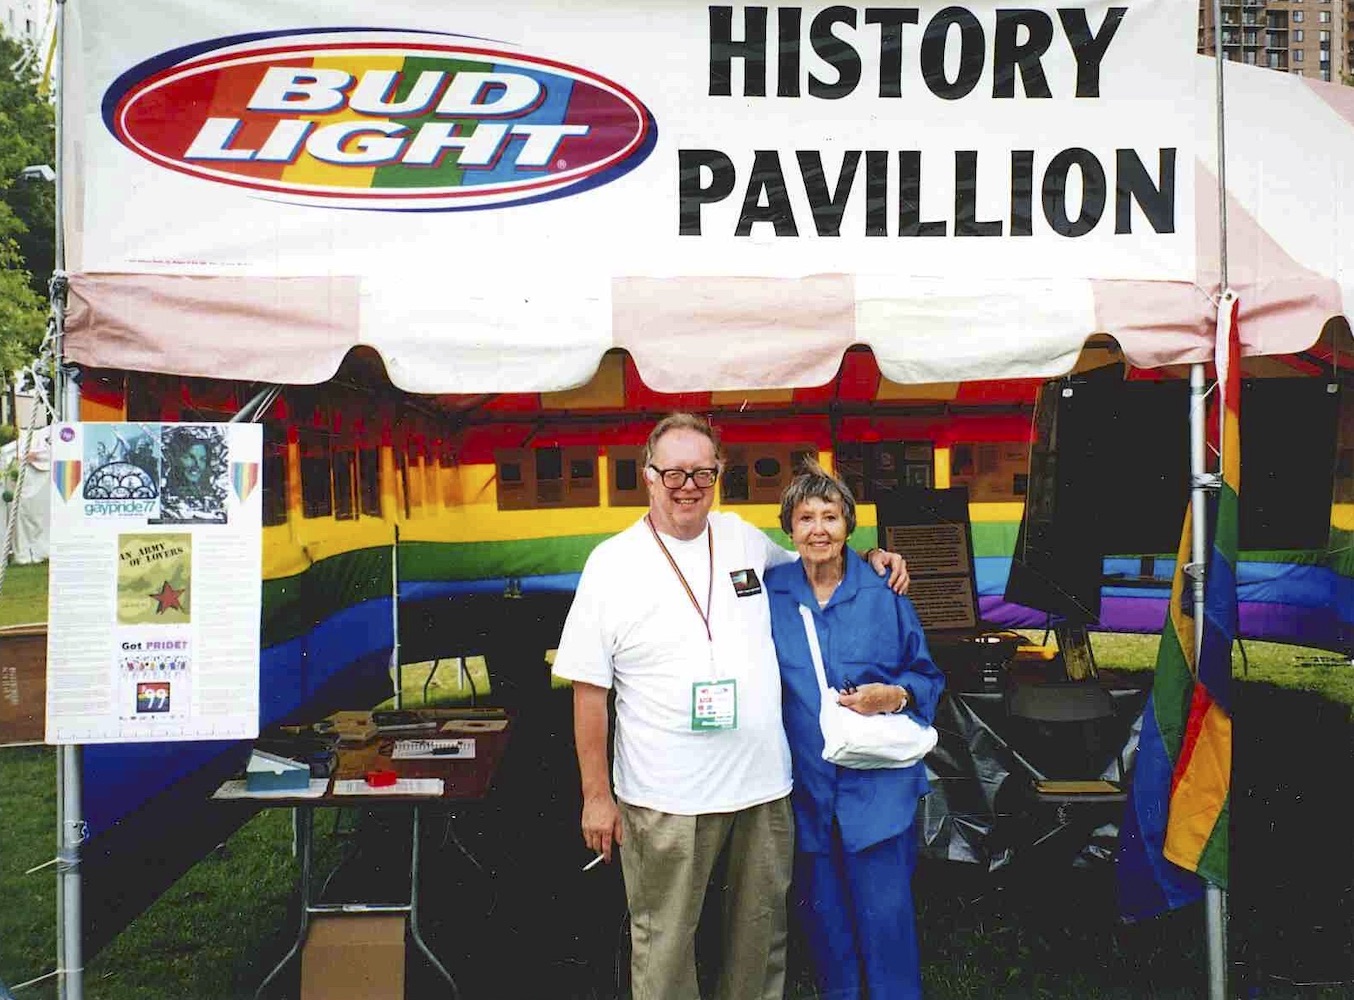 Jean-Nickolaus Tretter and Pat(ricia) Barnhart, the mother of Jim Chalgrew, on Pride Day, June 24, 2001. Photo courtesy of Jean Tretter.